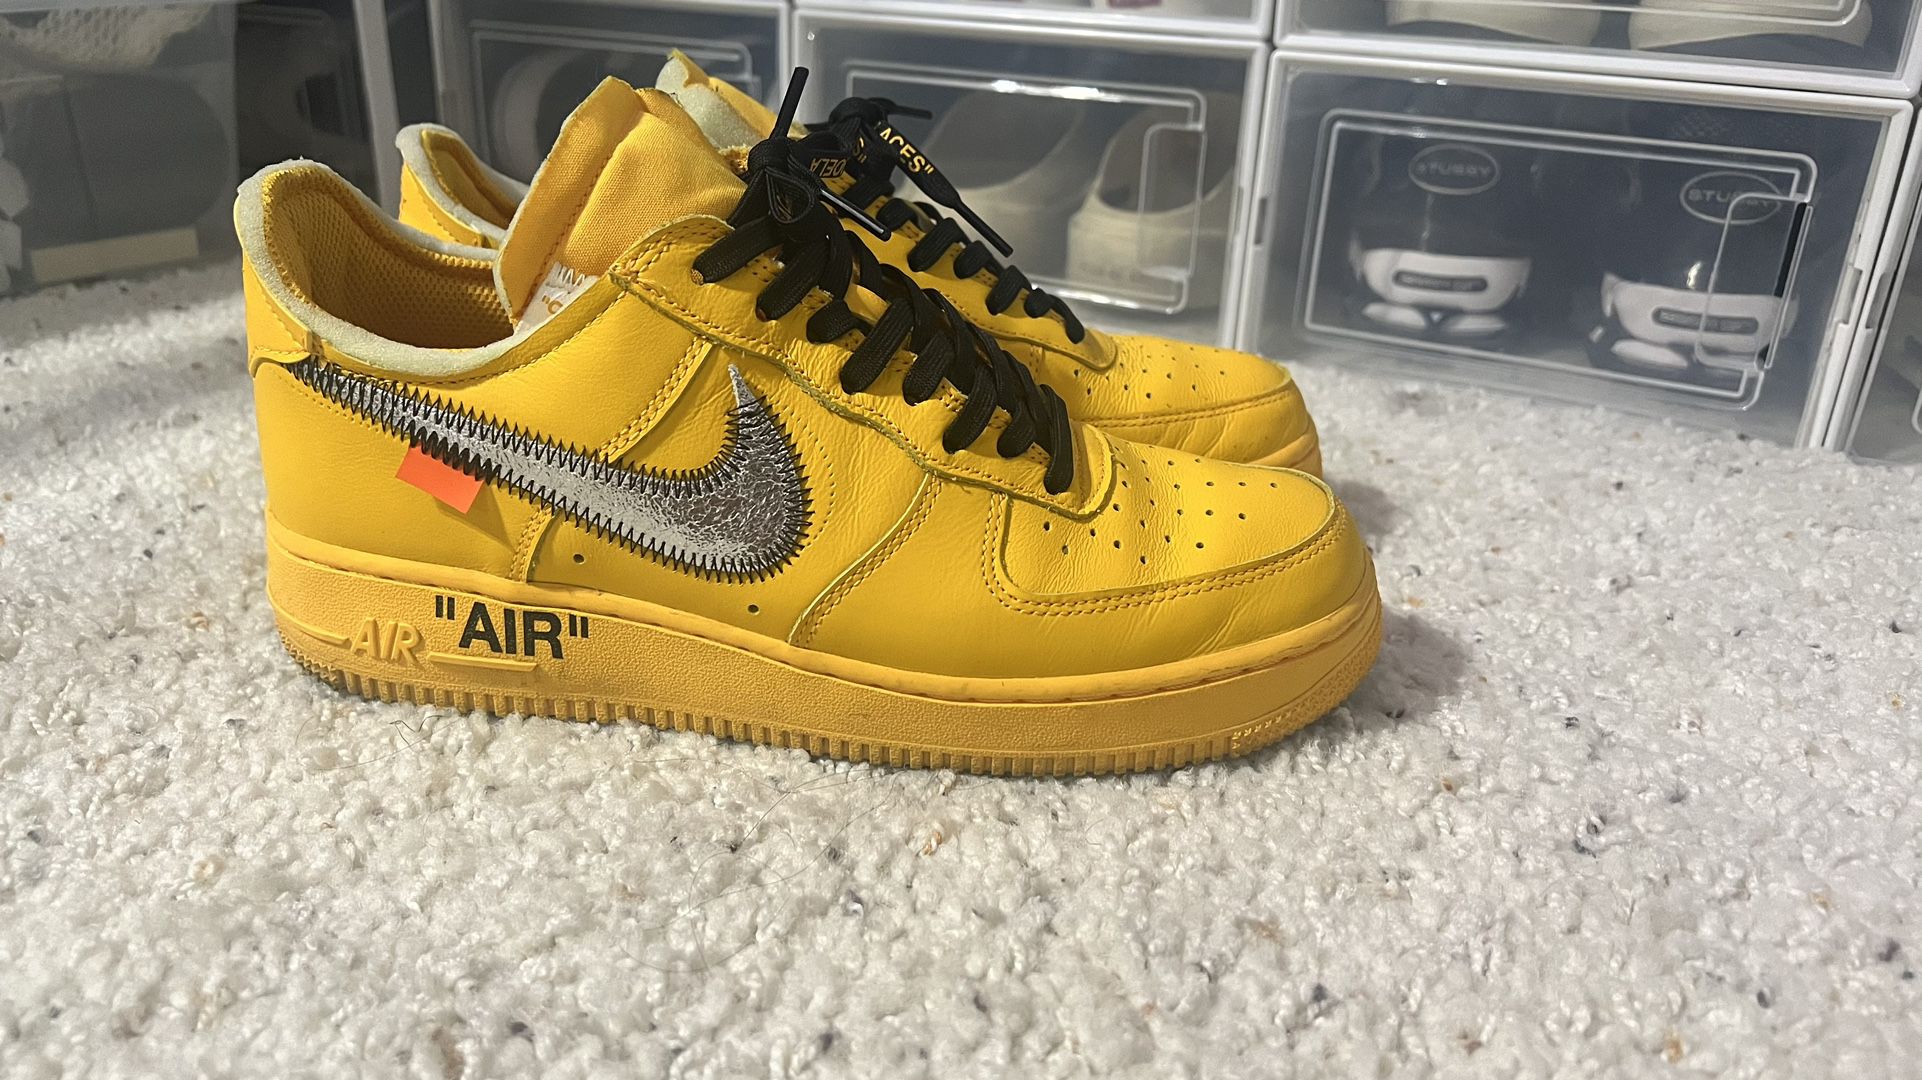 Nike Air Force 1 Low OFF-WHITE University Gold Lemonade ICA Size